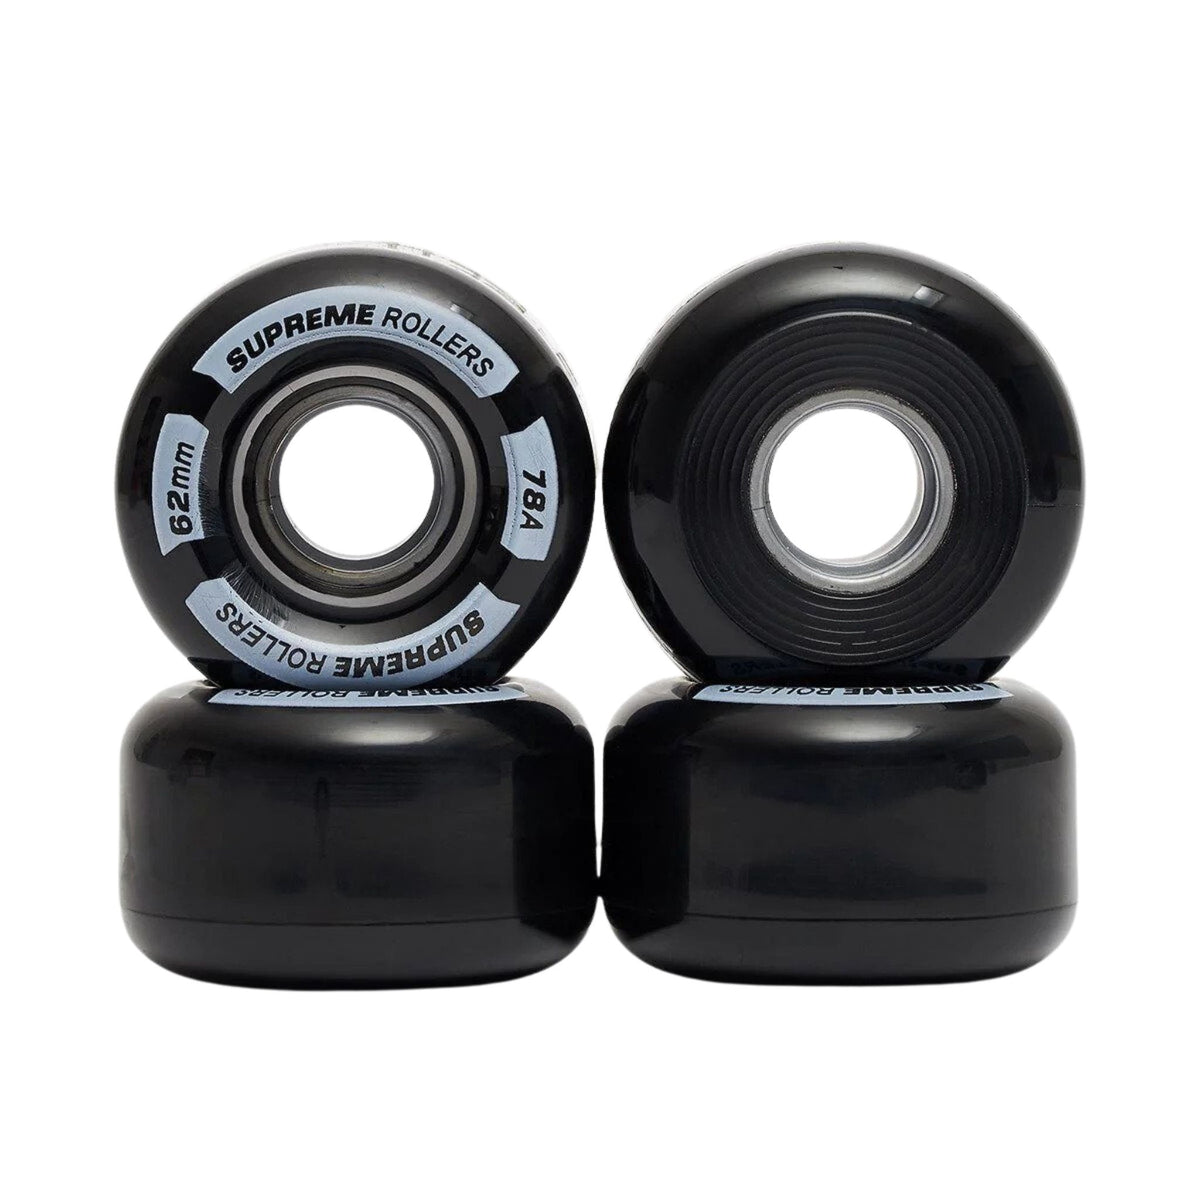 Supreme Rollers Quad Wheels 62mm/78A- Set of 4 - Roller Skates Parts and Accessories | JT Skate